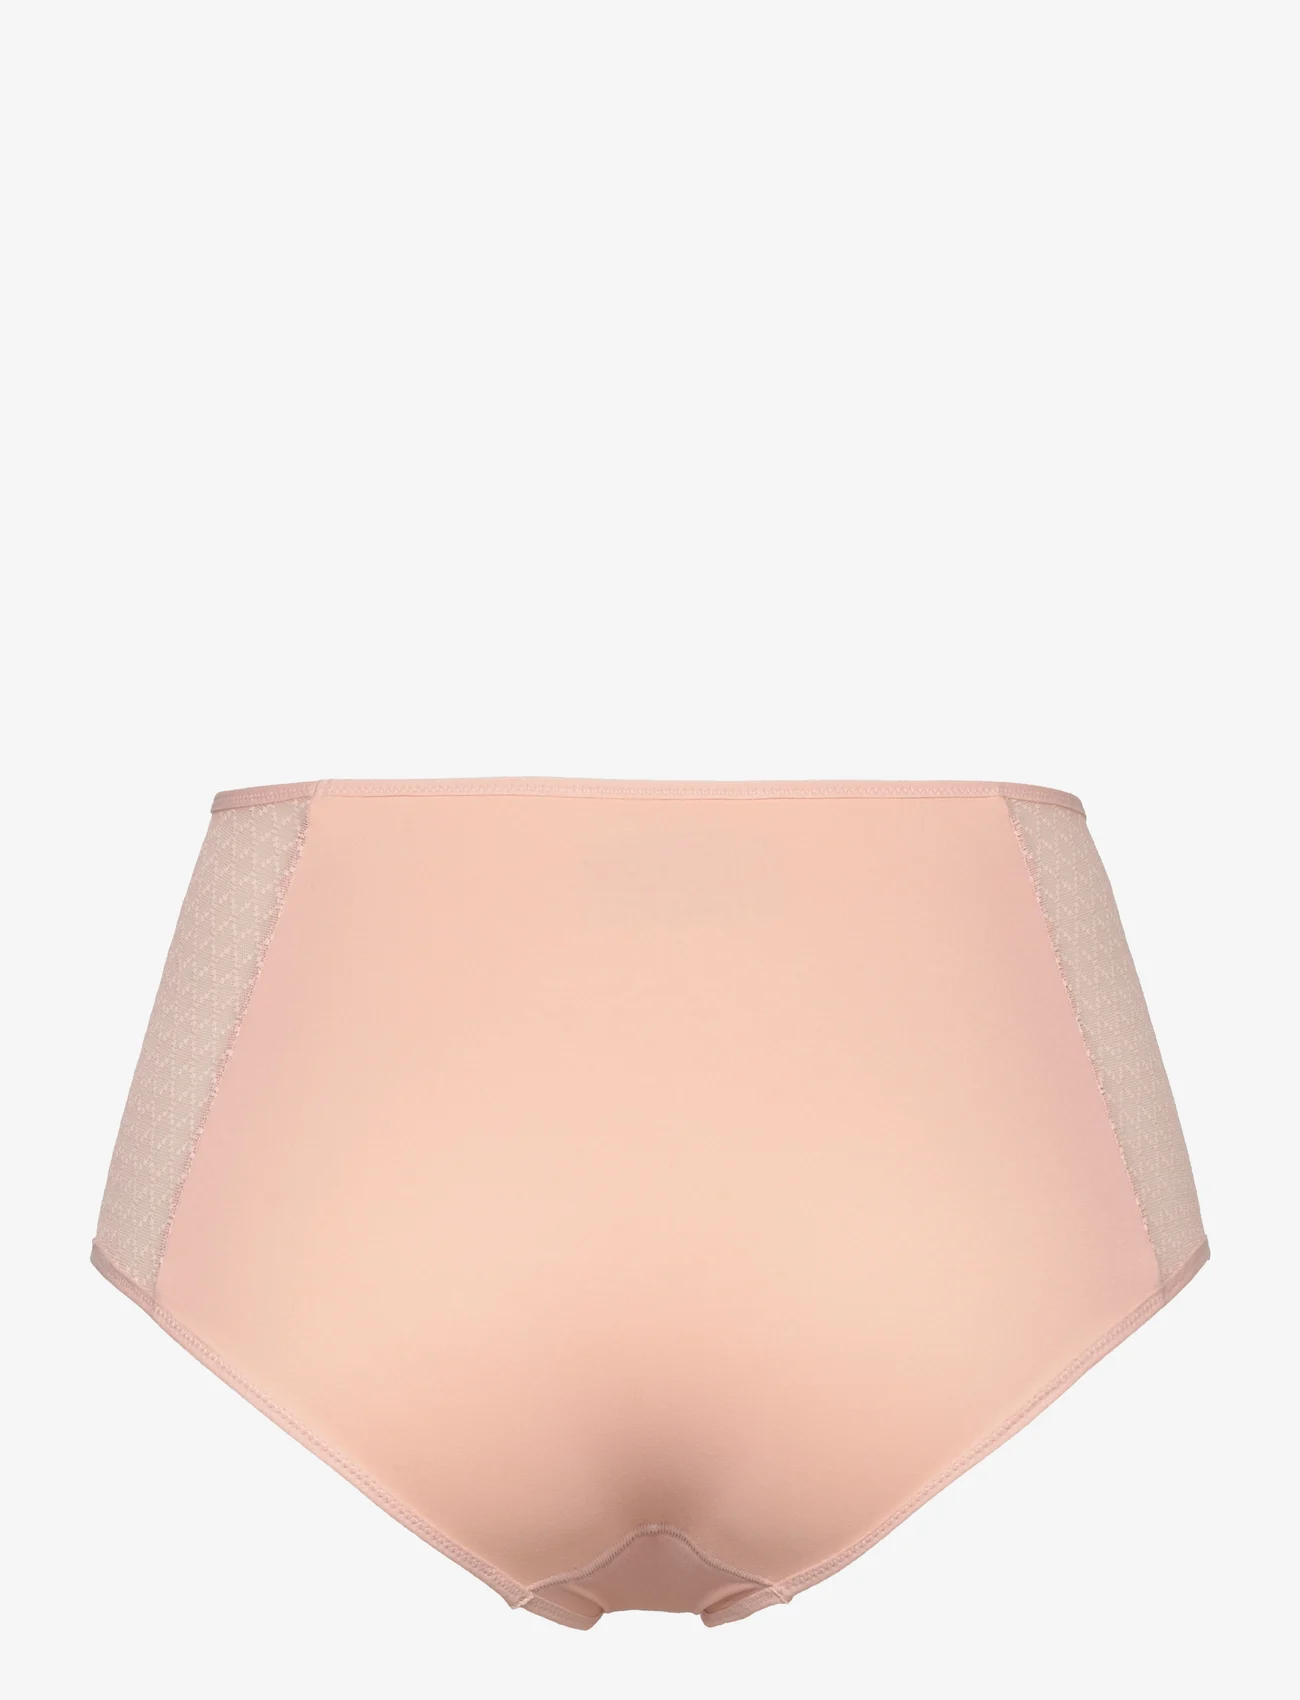 CHANTELLE - Norah Chic High-Waisted Covering Brief - women - soft pink - 1